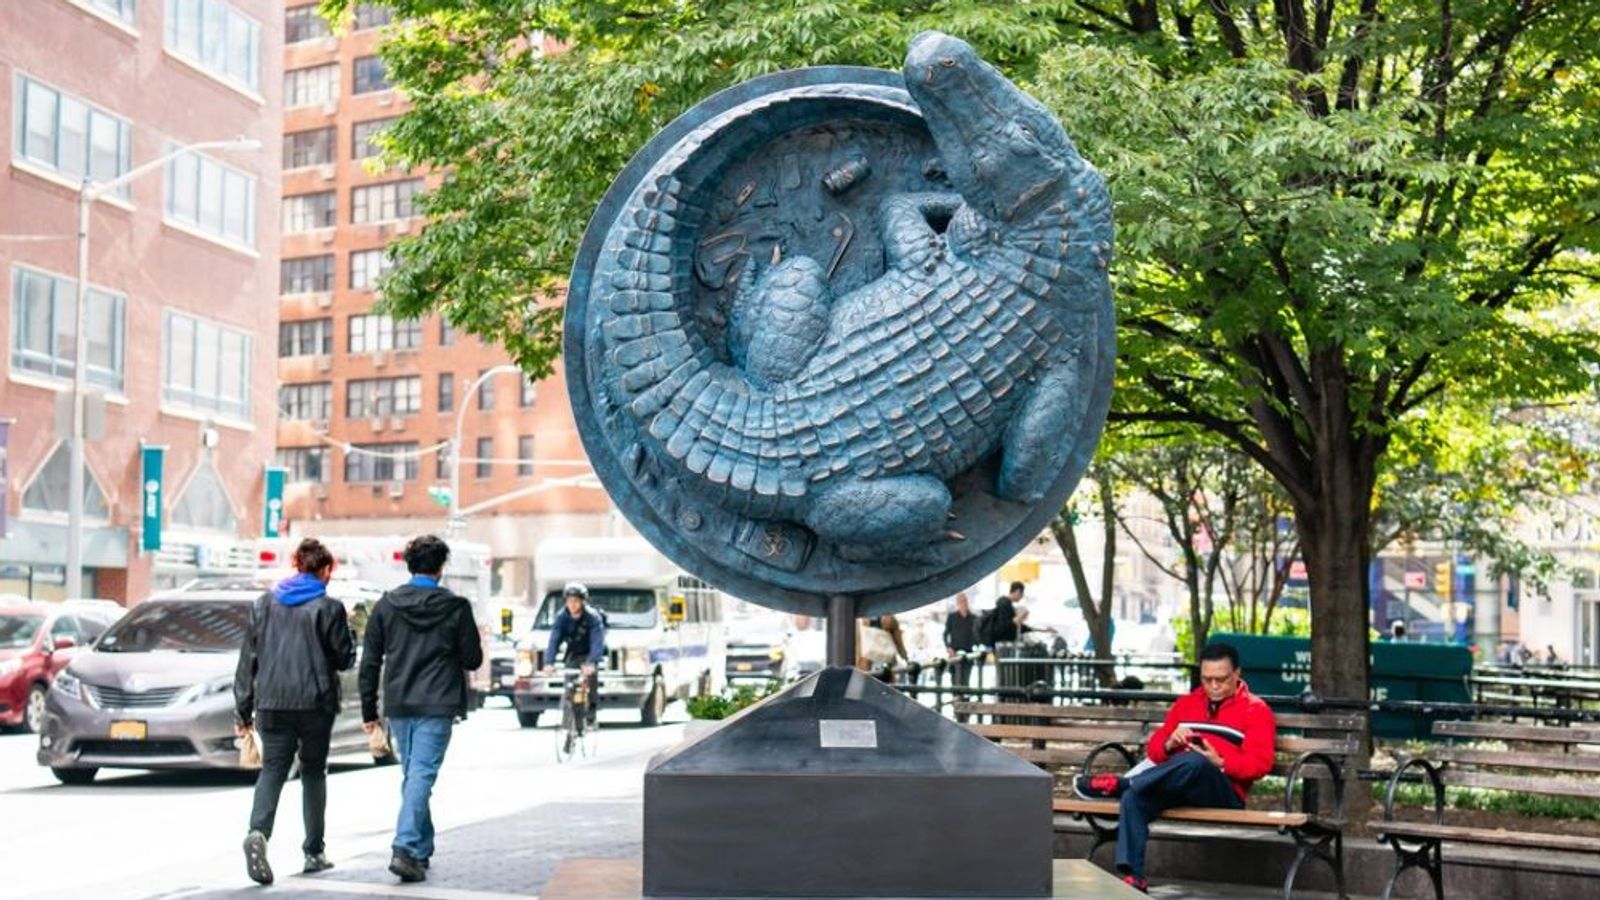 New York: Sculpture commemorating alligator sewer myth unveiled in Union Square Park